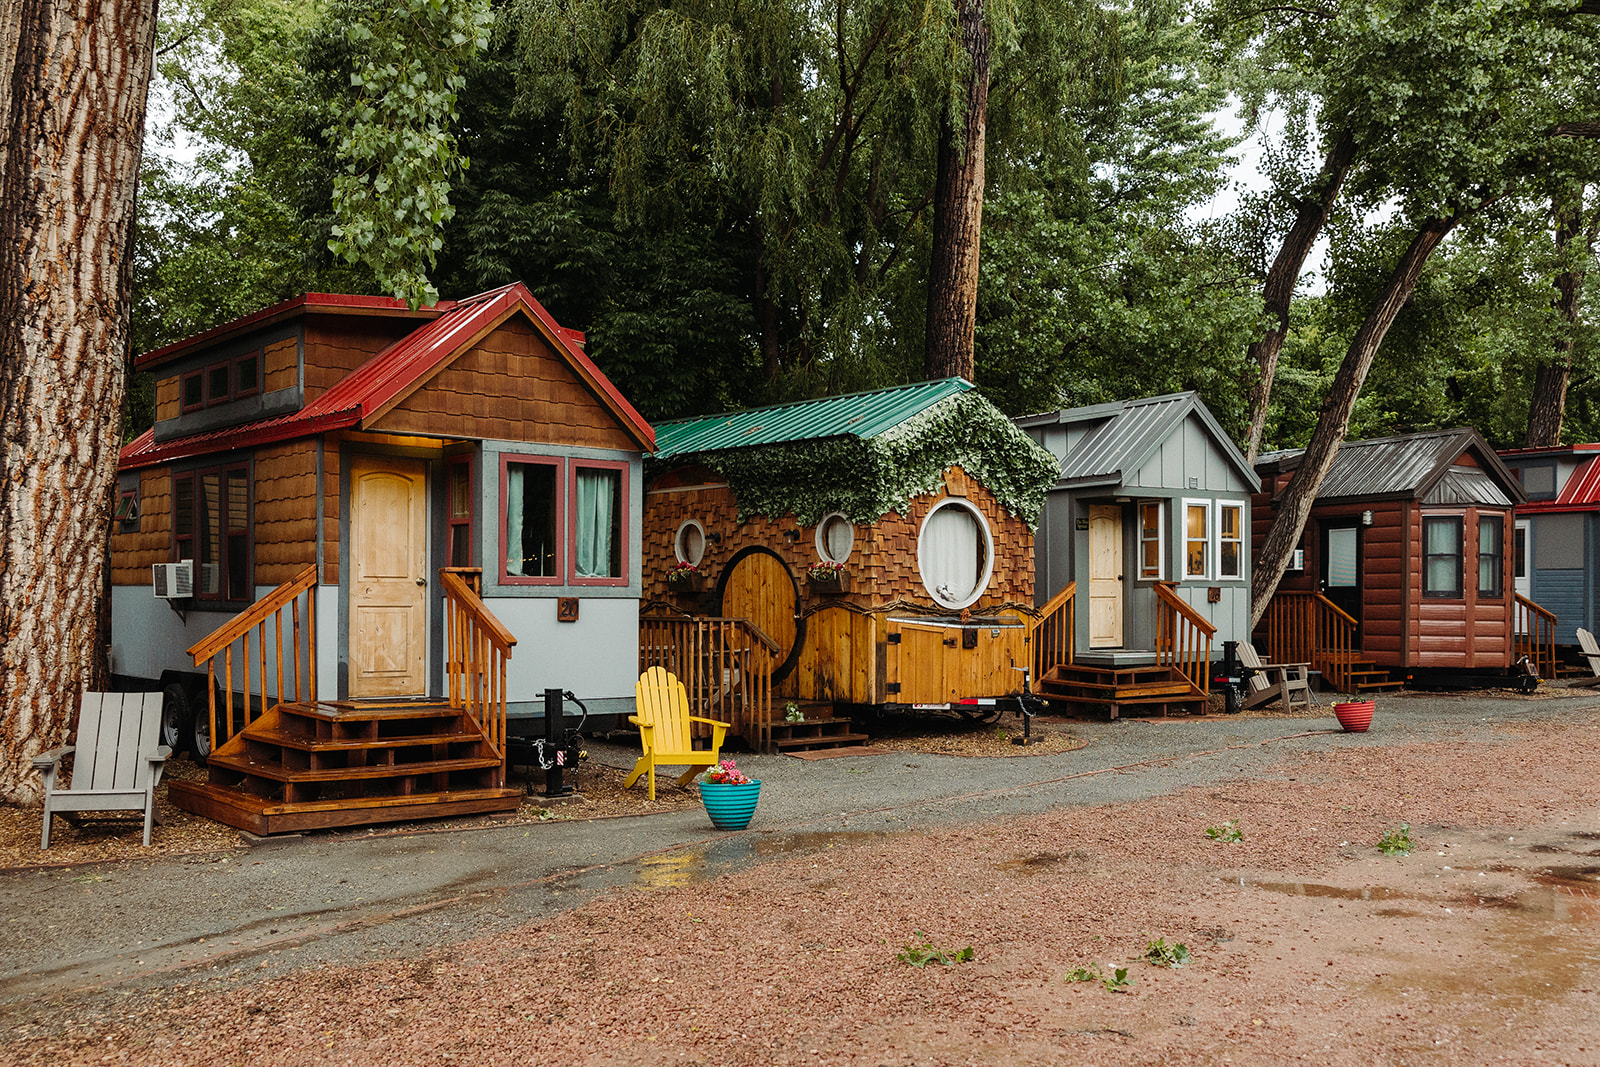 The tiny house resort, WeeCasa, located on the River Bend property. Pictured is a row of uniquely designed tiny homes.